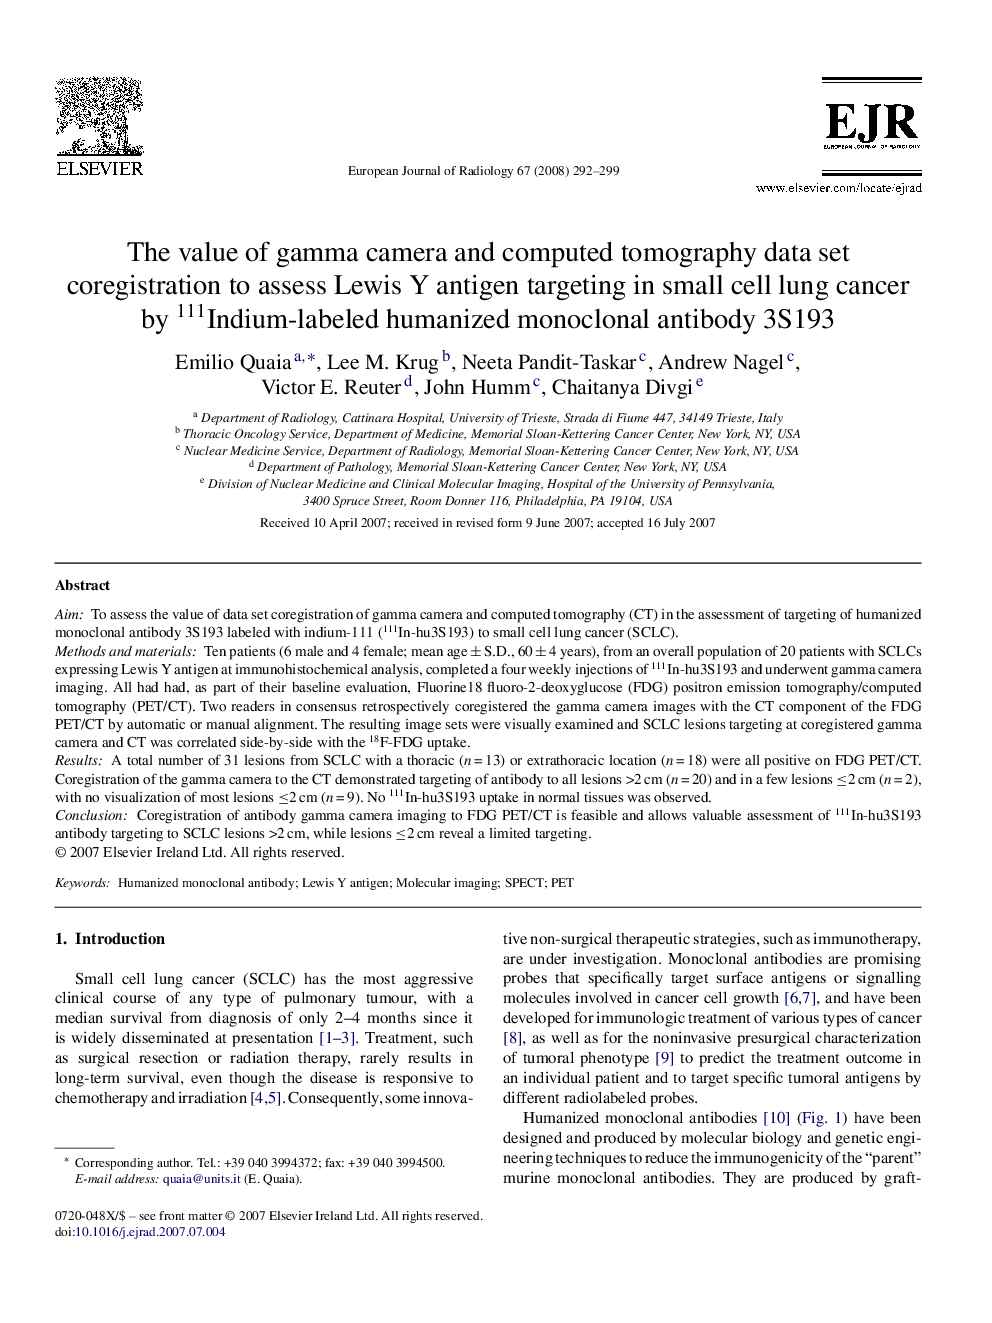 The value of gamma camera and computed tomography data set coregistration to assess Lewis Y antigen targeting in small cell lung cancer by 111Indium-labeled humanized monoclonal antibody 3S193